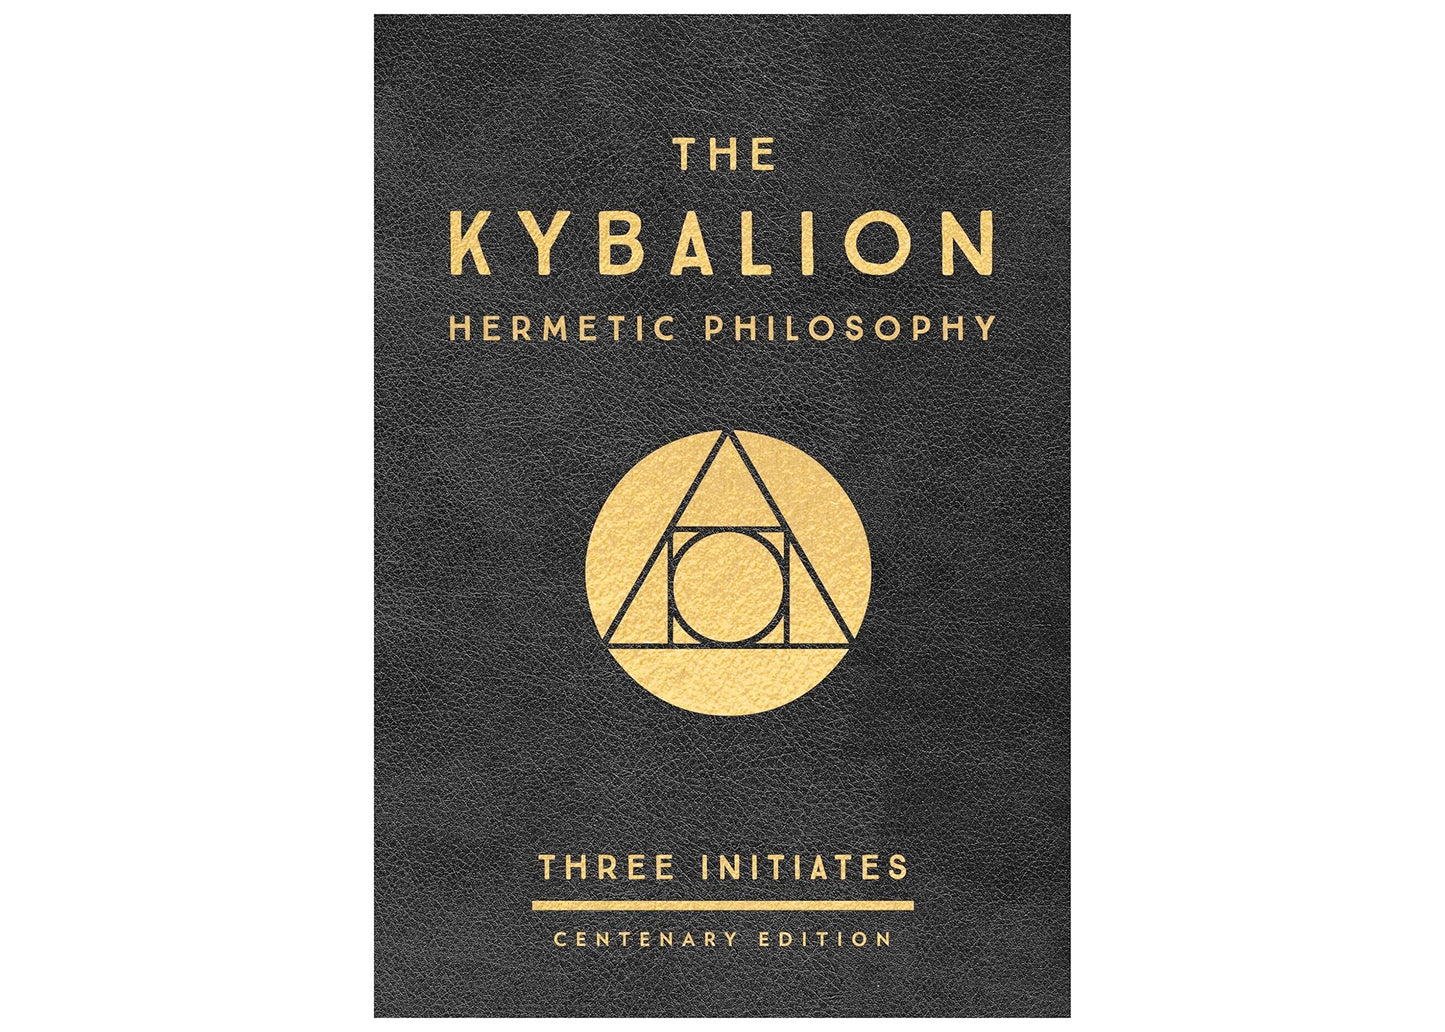 The Kybalion: Hermetic Philosophy - Centenary Edition Hardcover Book